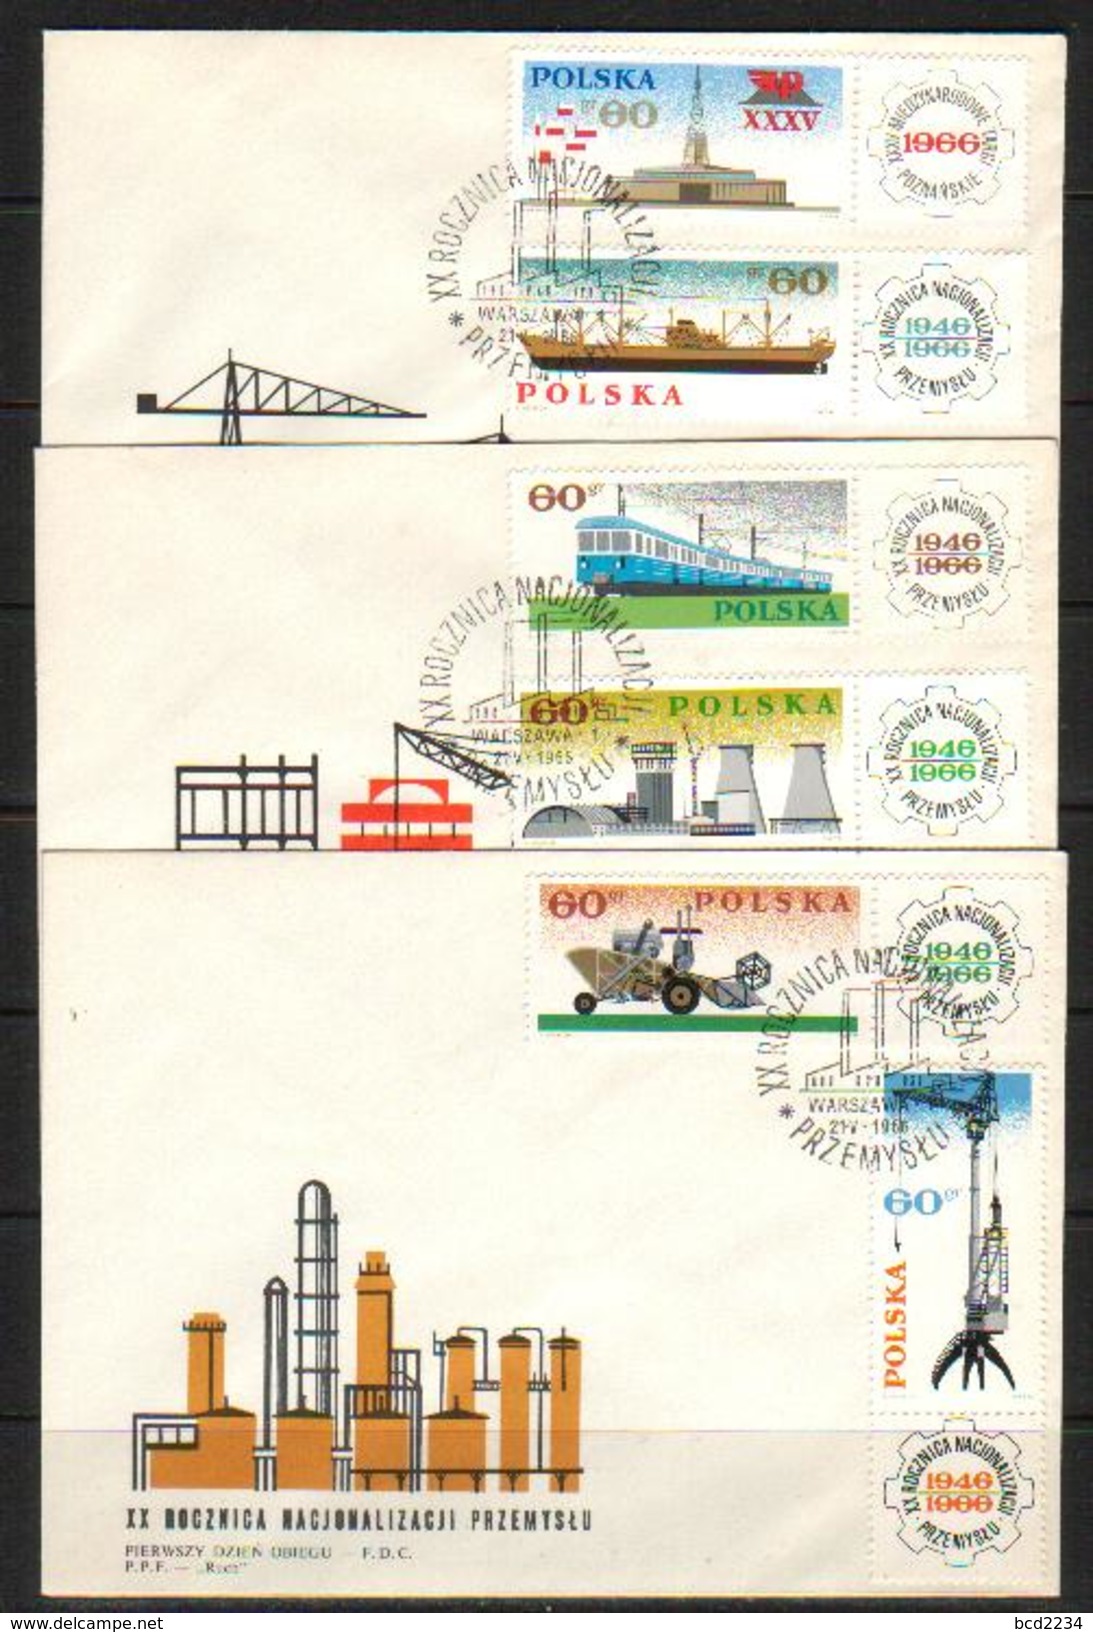 POLAND FDC 1966 20TH ANNIV INDUSTRY NATIONALISATION Ships Tanker Trains Railways Power Station Flags Farm Harvester Food - Schiffe